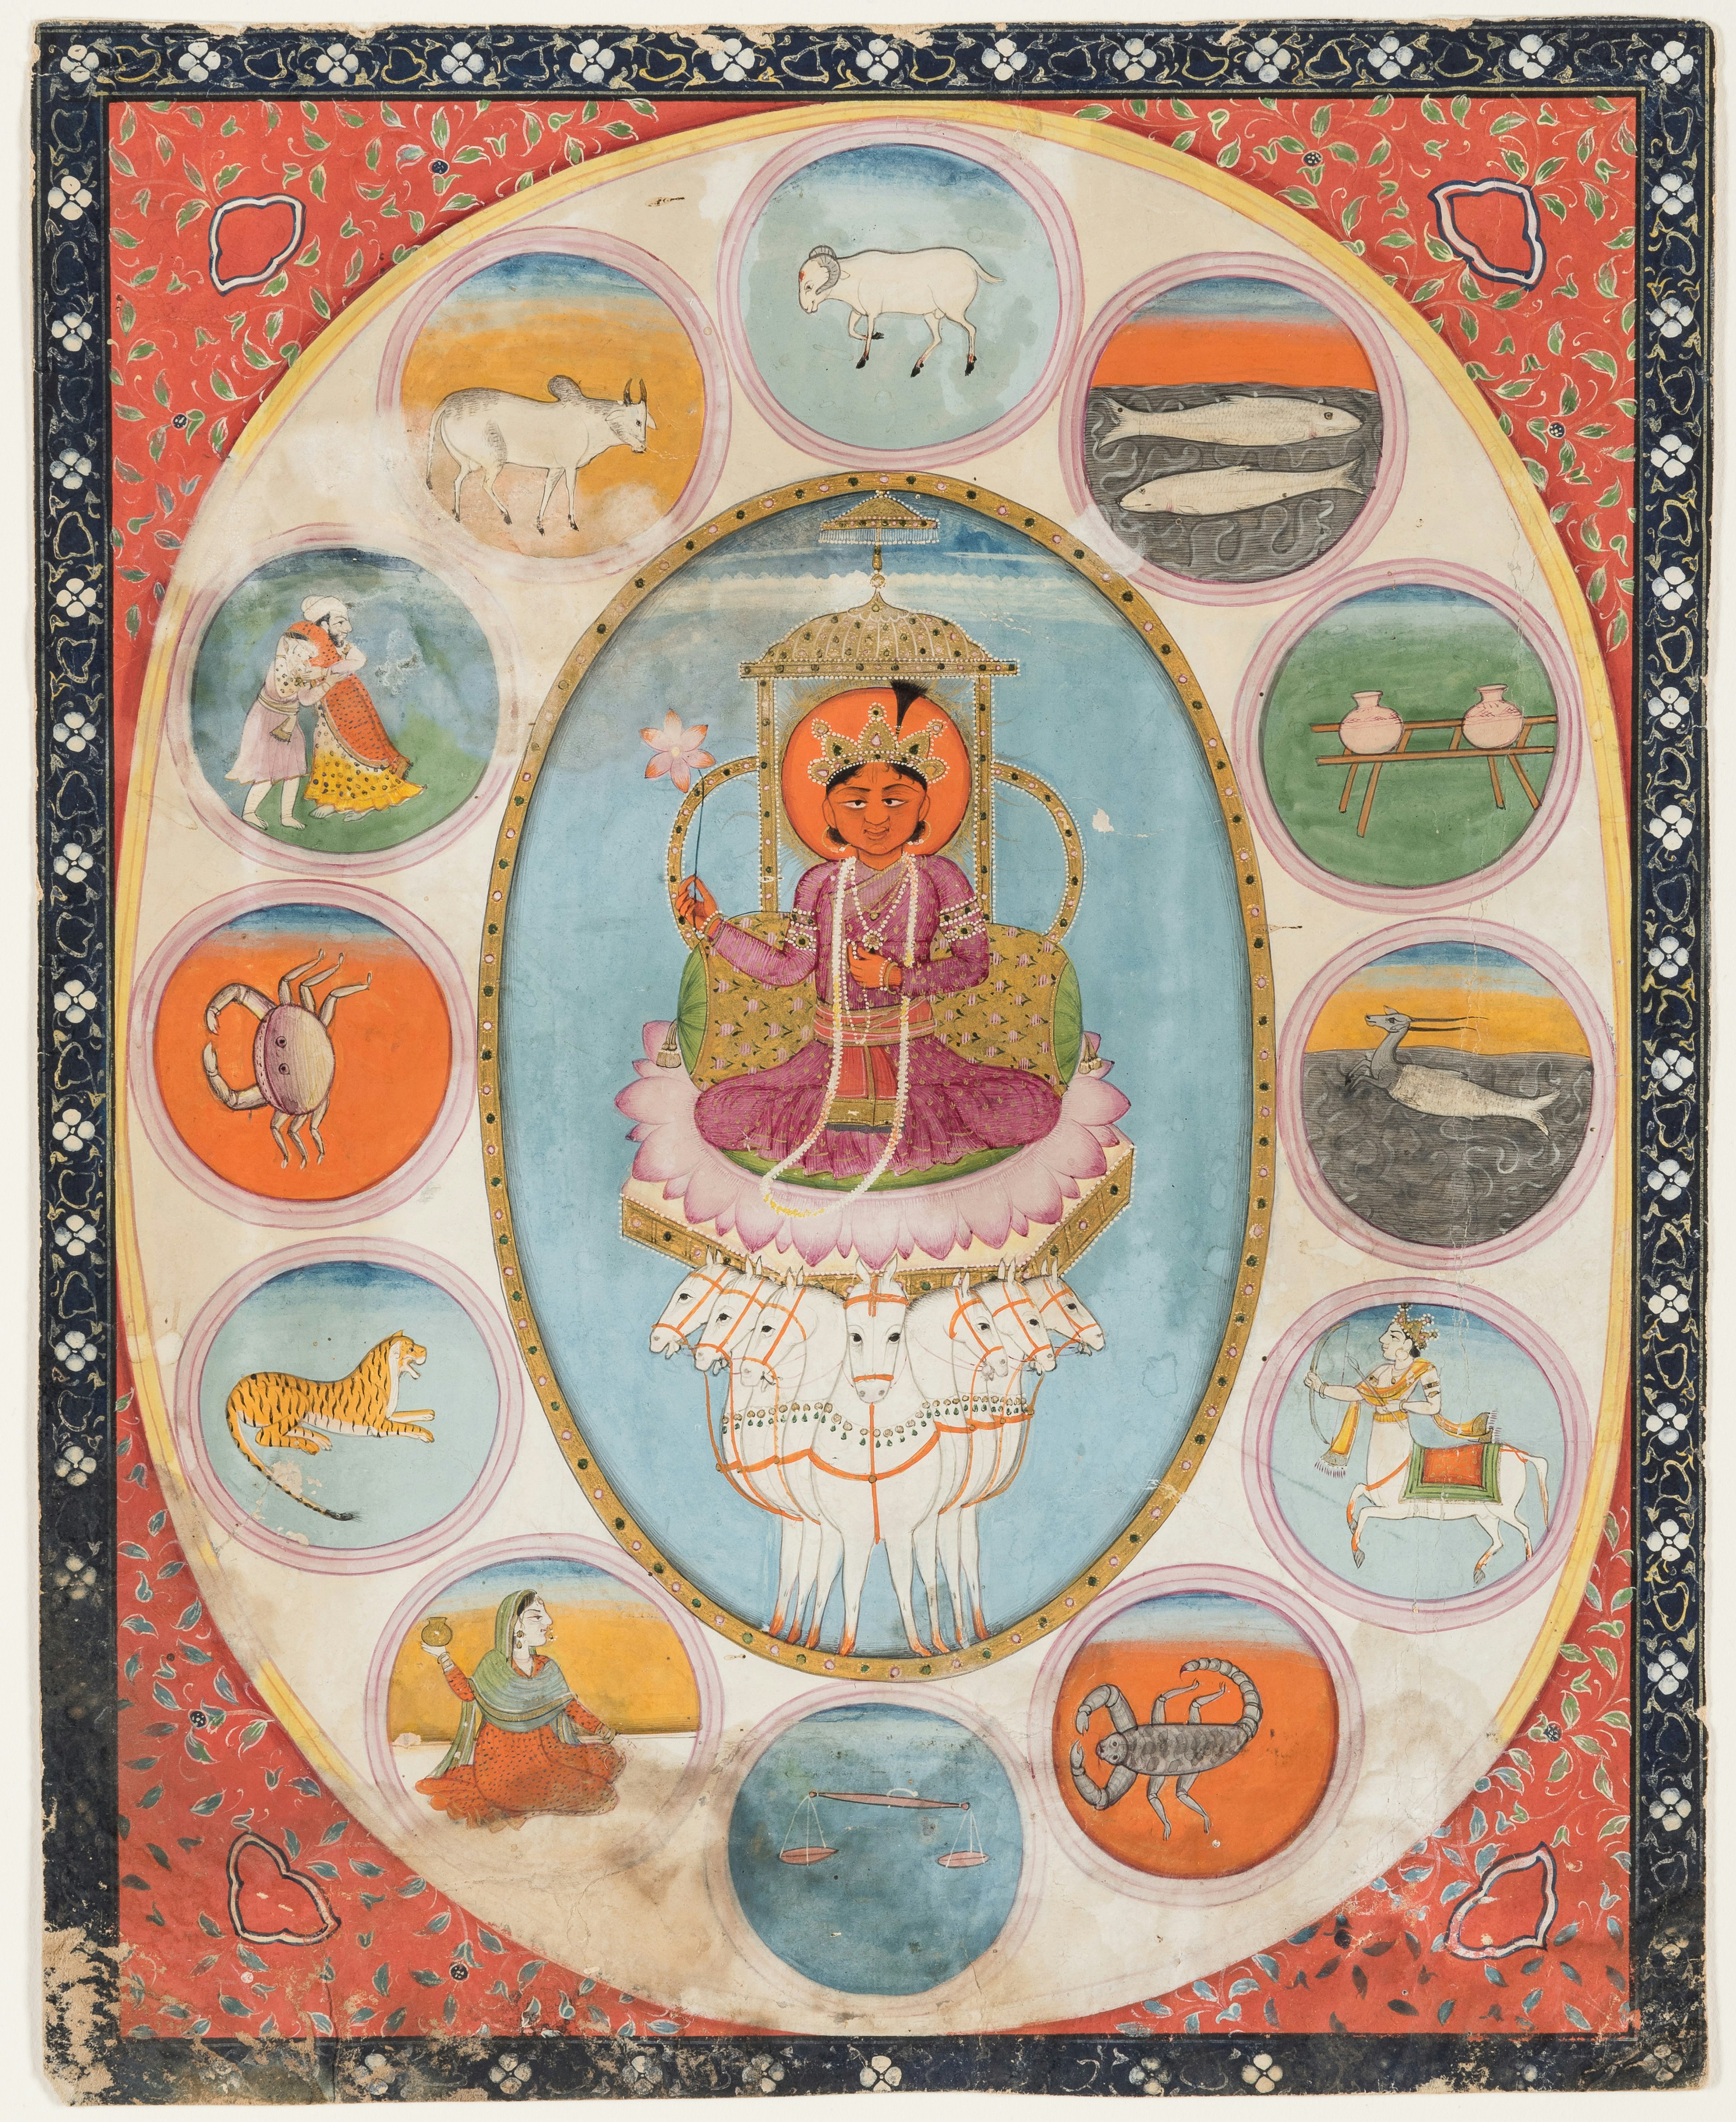 Surya surrounded by the signs of the Zodiac, 1830. Painting. Courtesy of the San Diego Museum of Art.